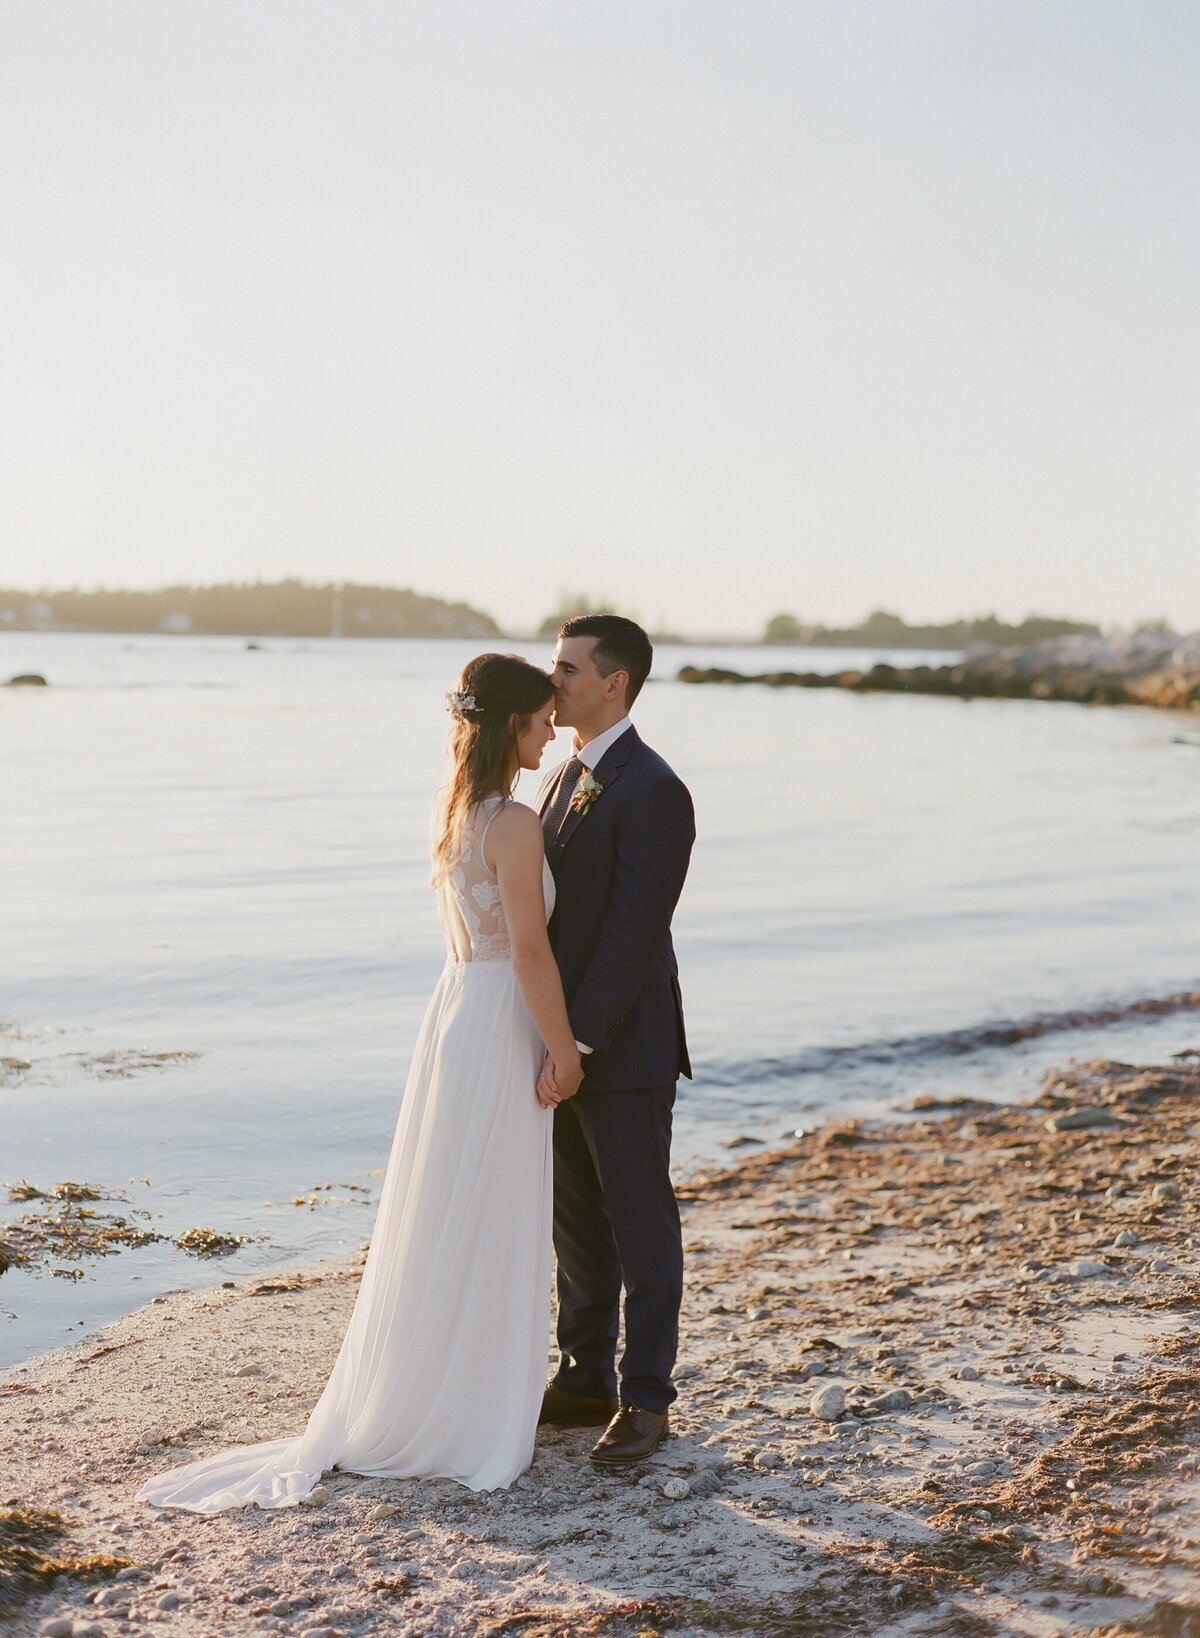 Jacqueline Anne Photography - Halifax Wedding Photographer - Jaclyn and Morgan-88